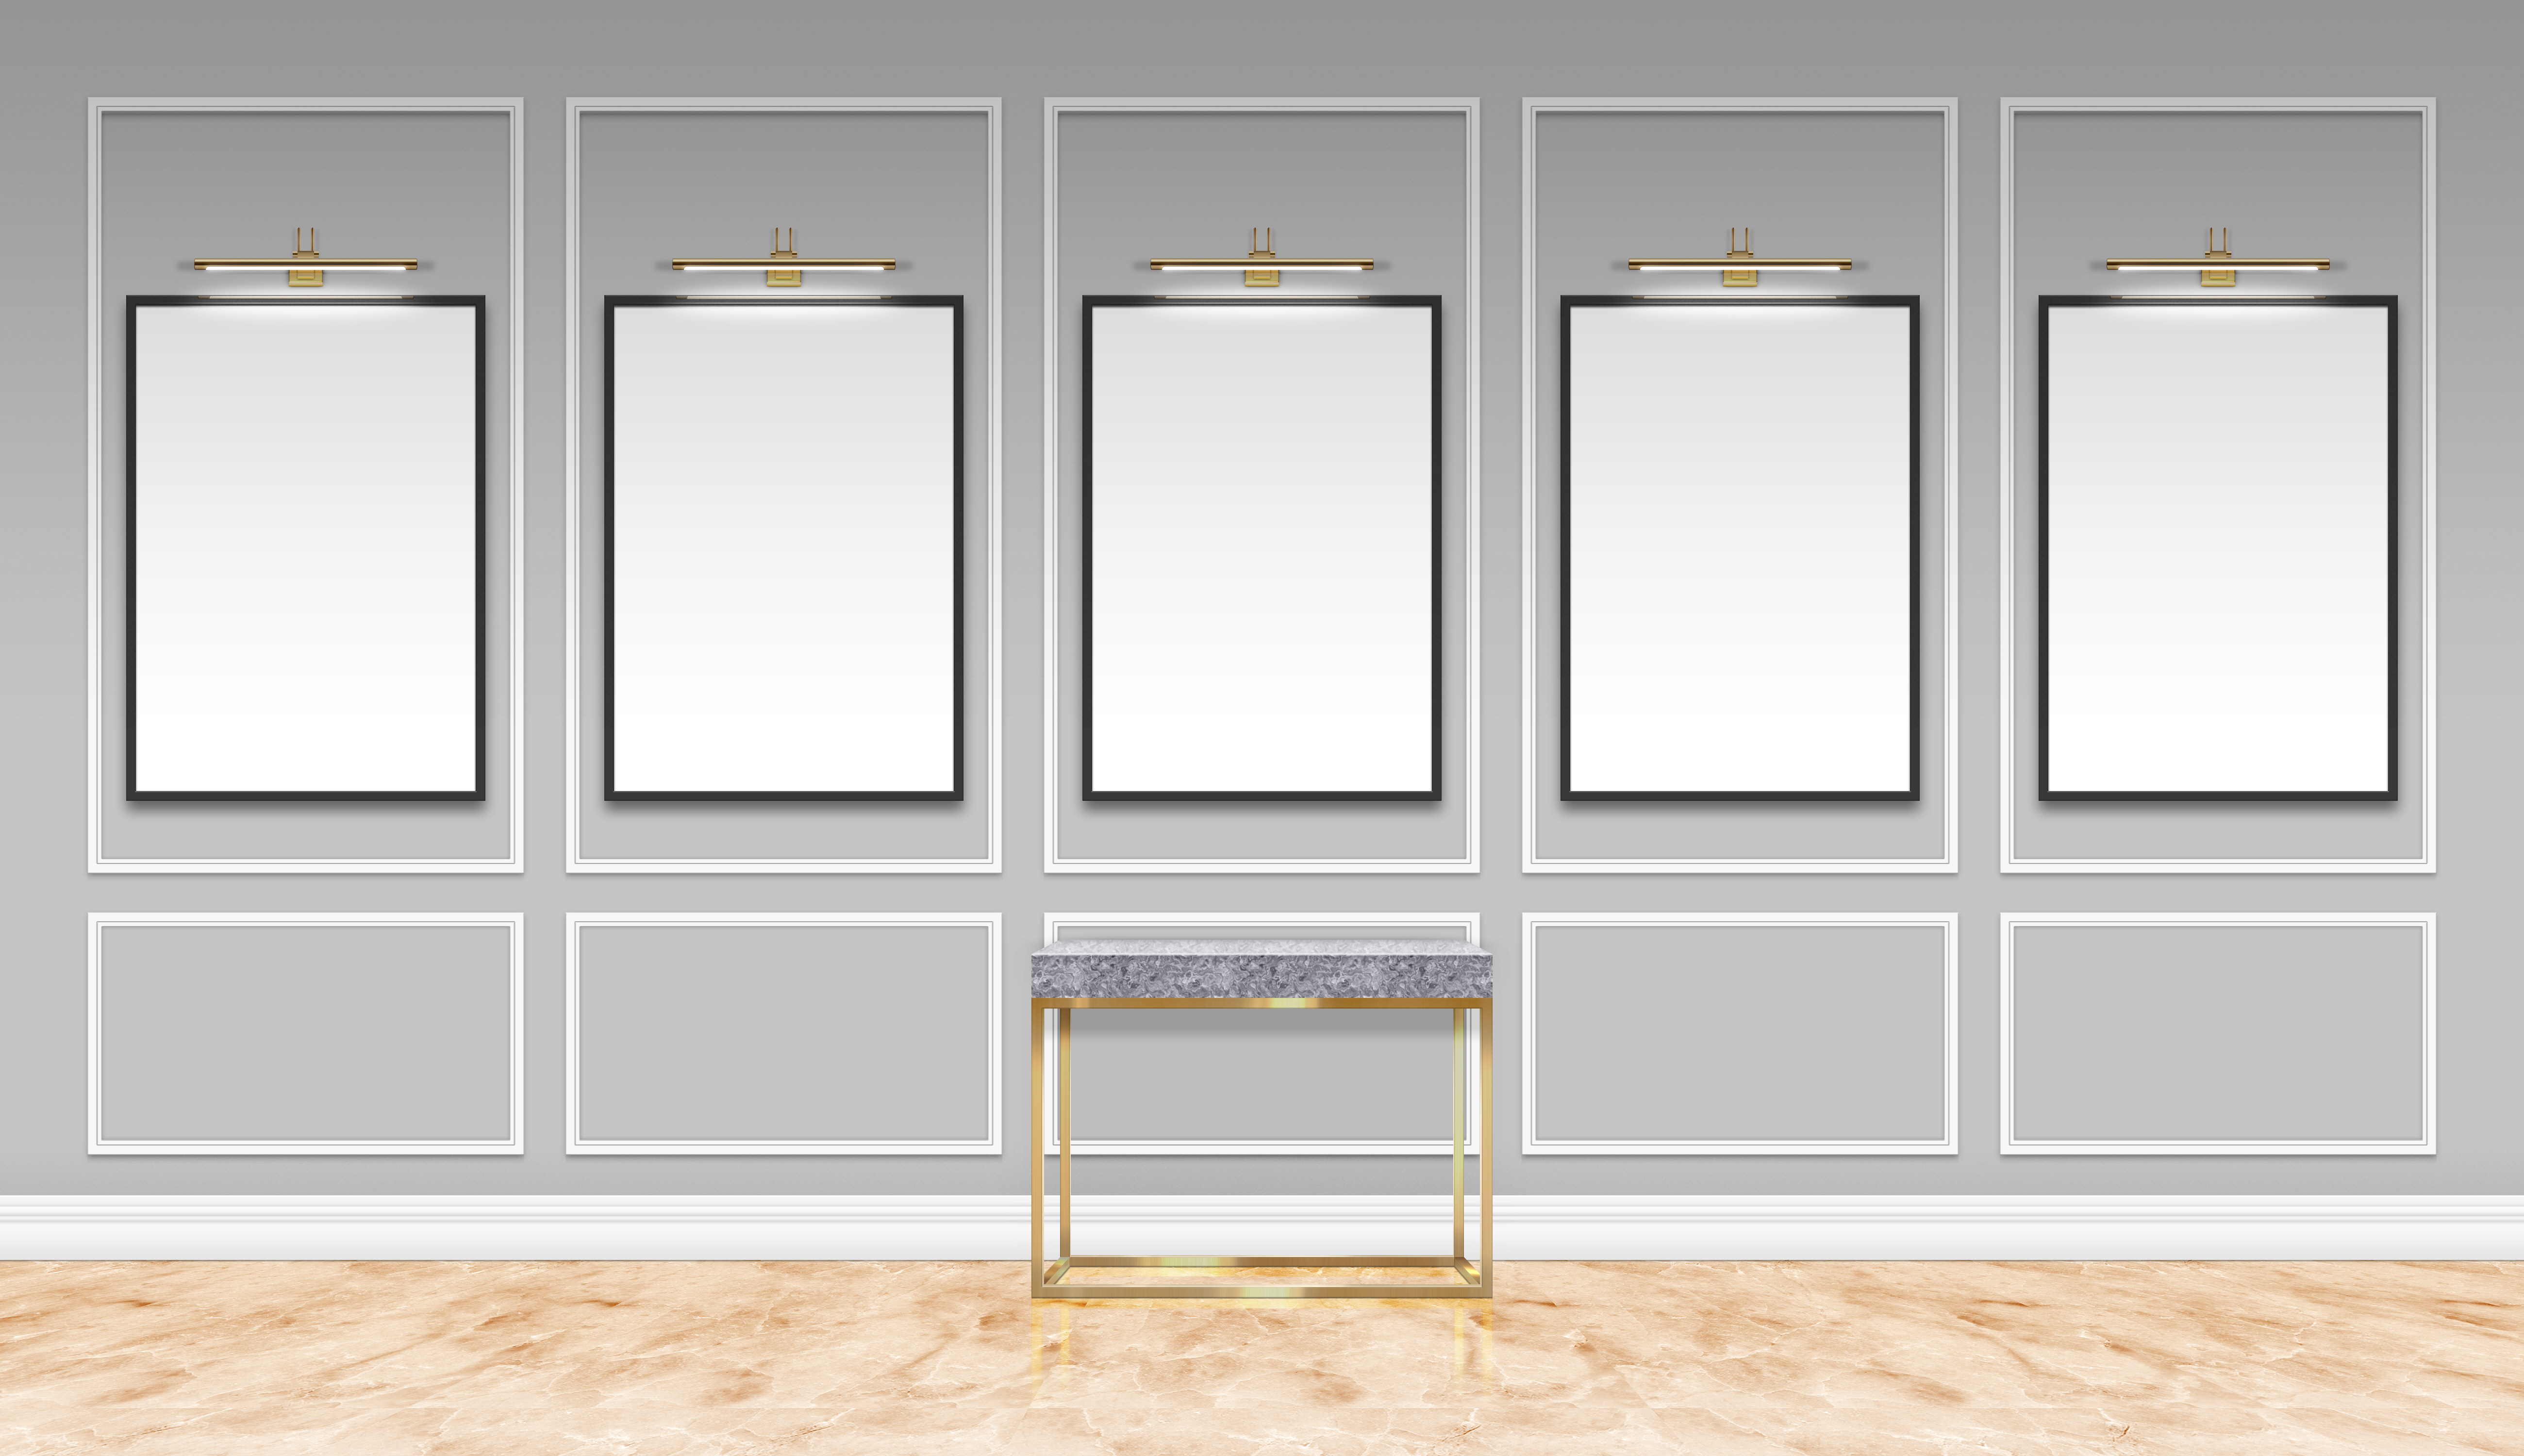 Studio Wall Galleries Picture Frames Minimalism Simple Background 5200x3000